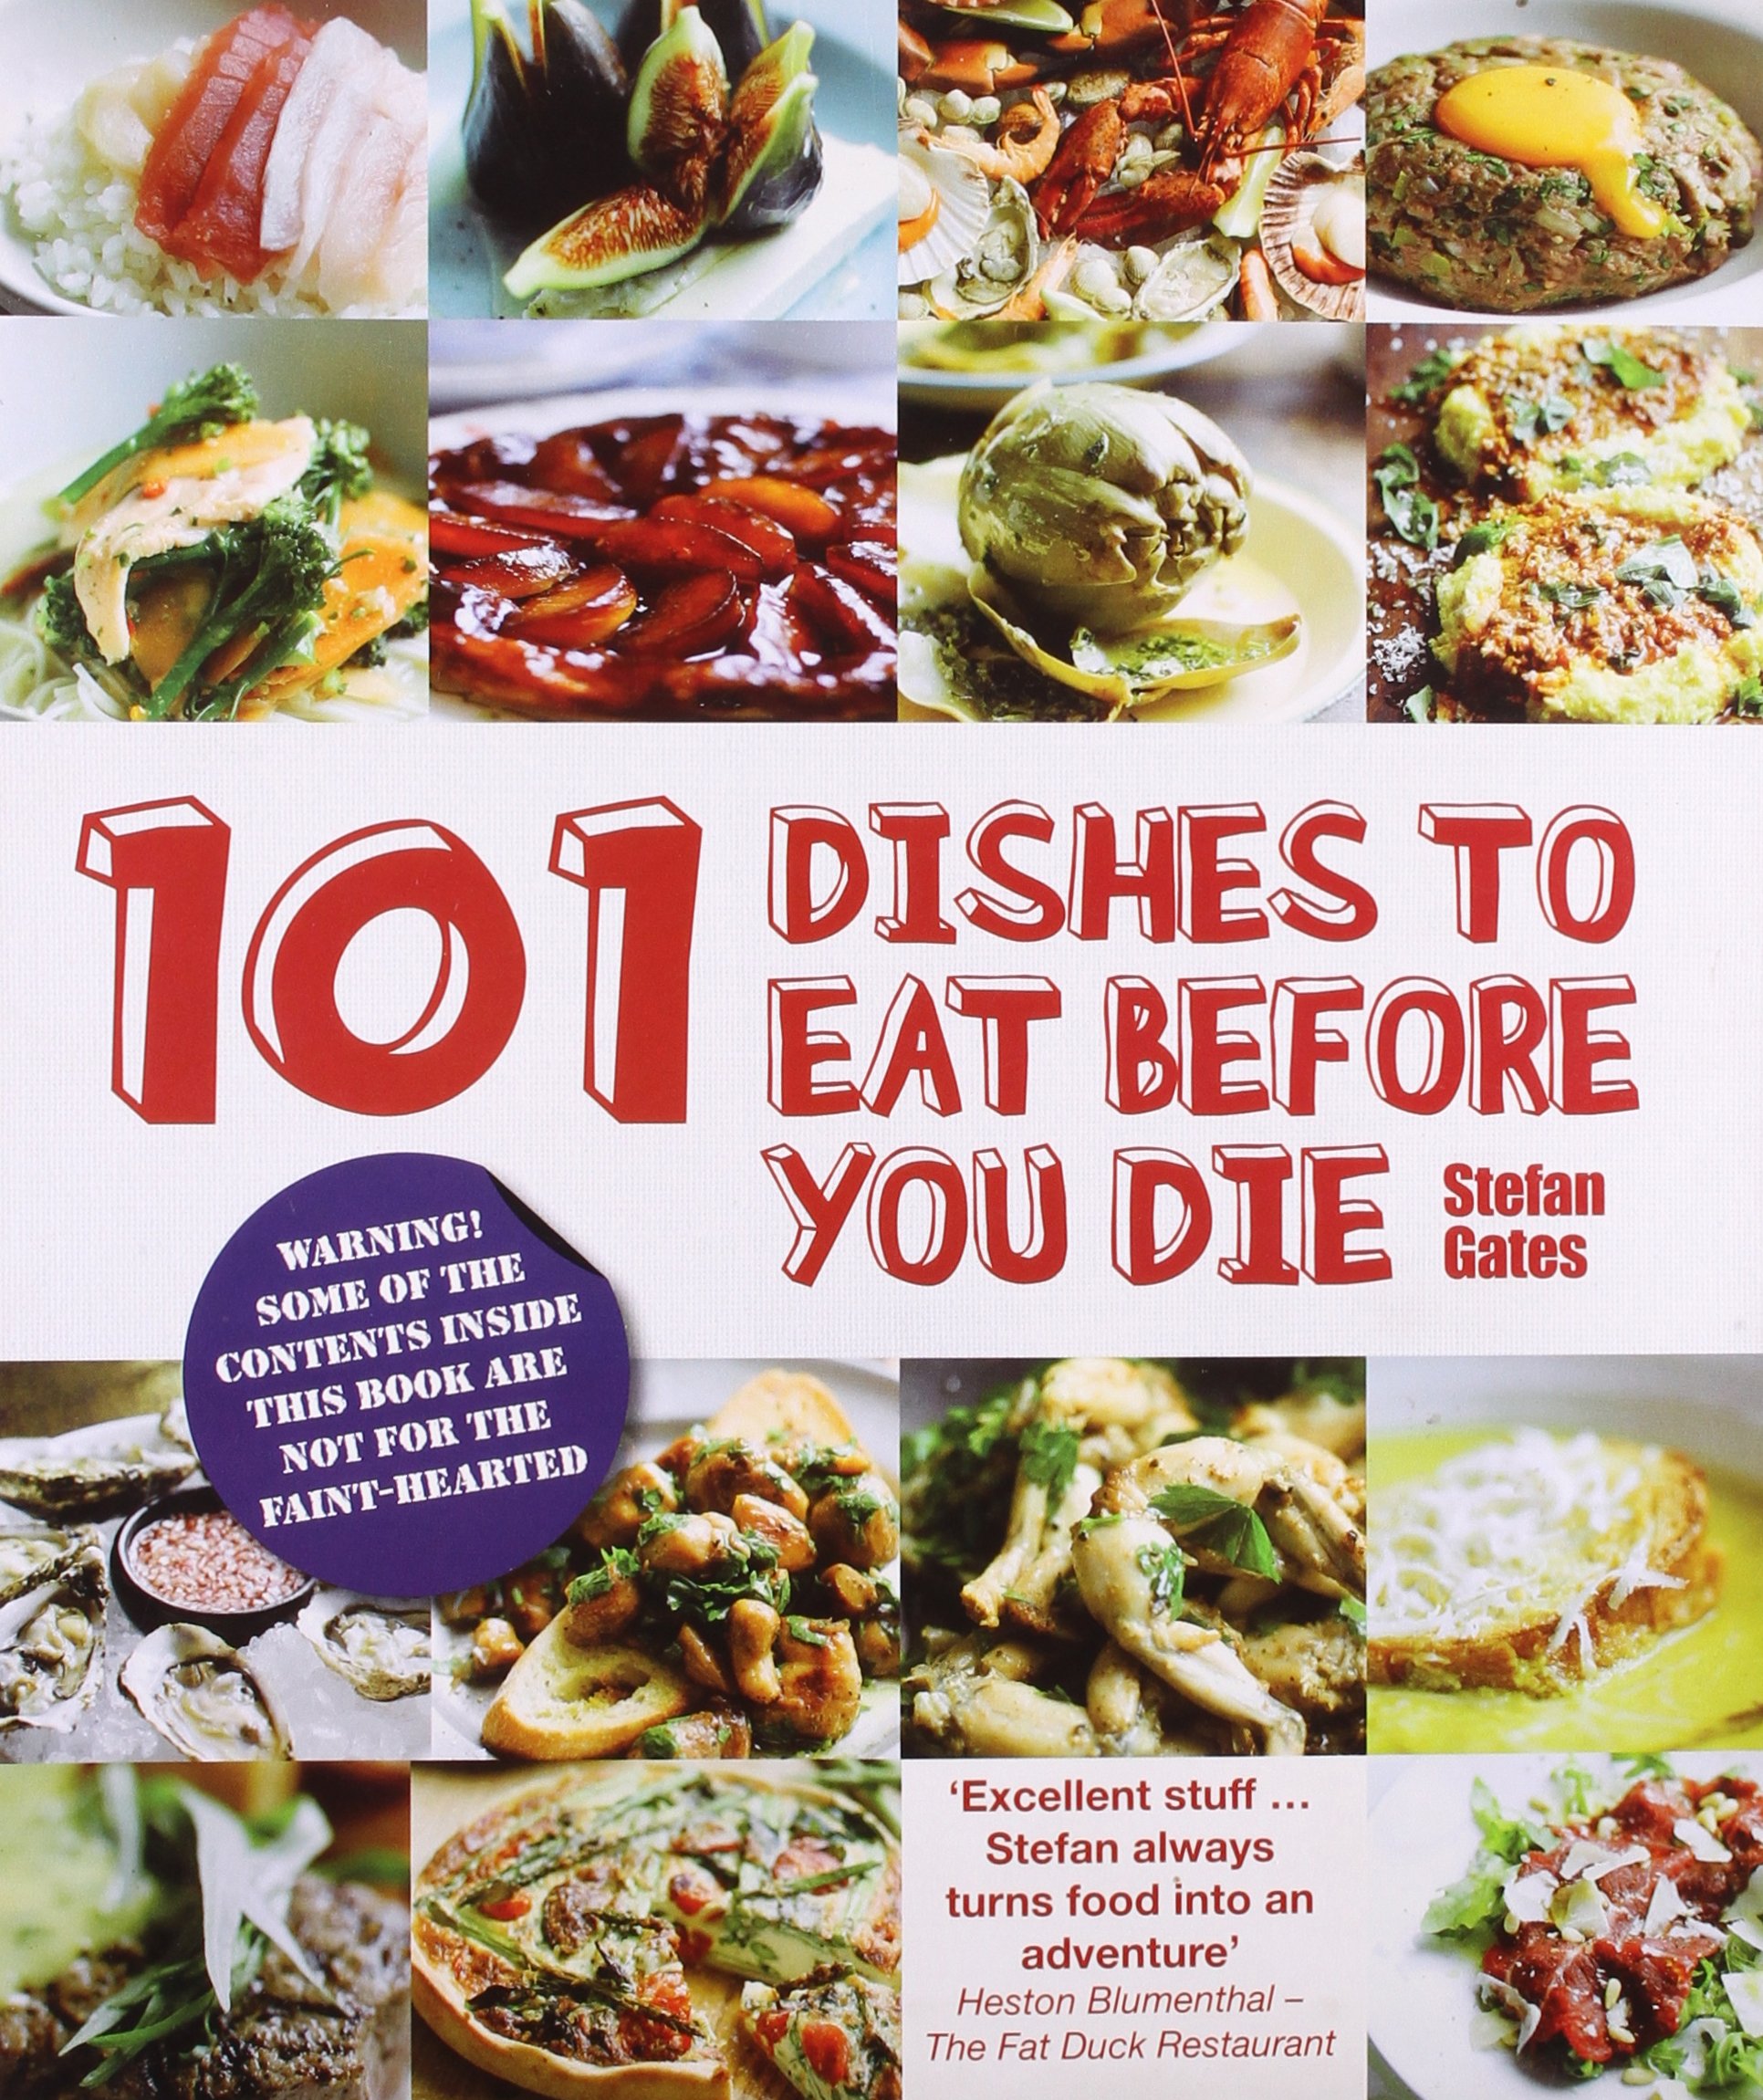 101 DISHES TO EAT BEFORE YOU DIE